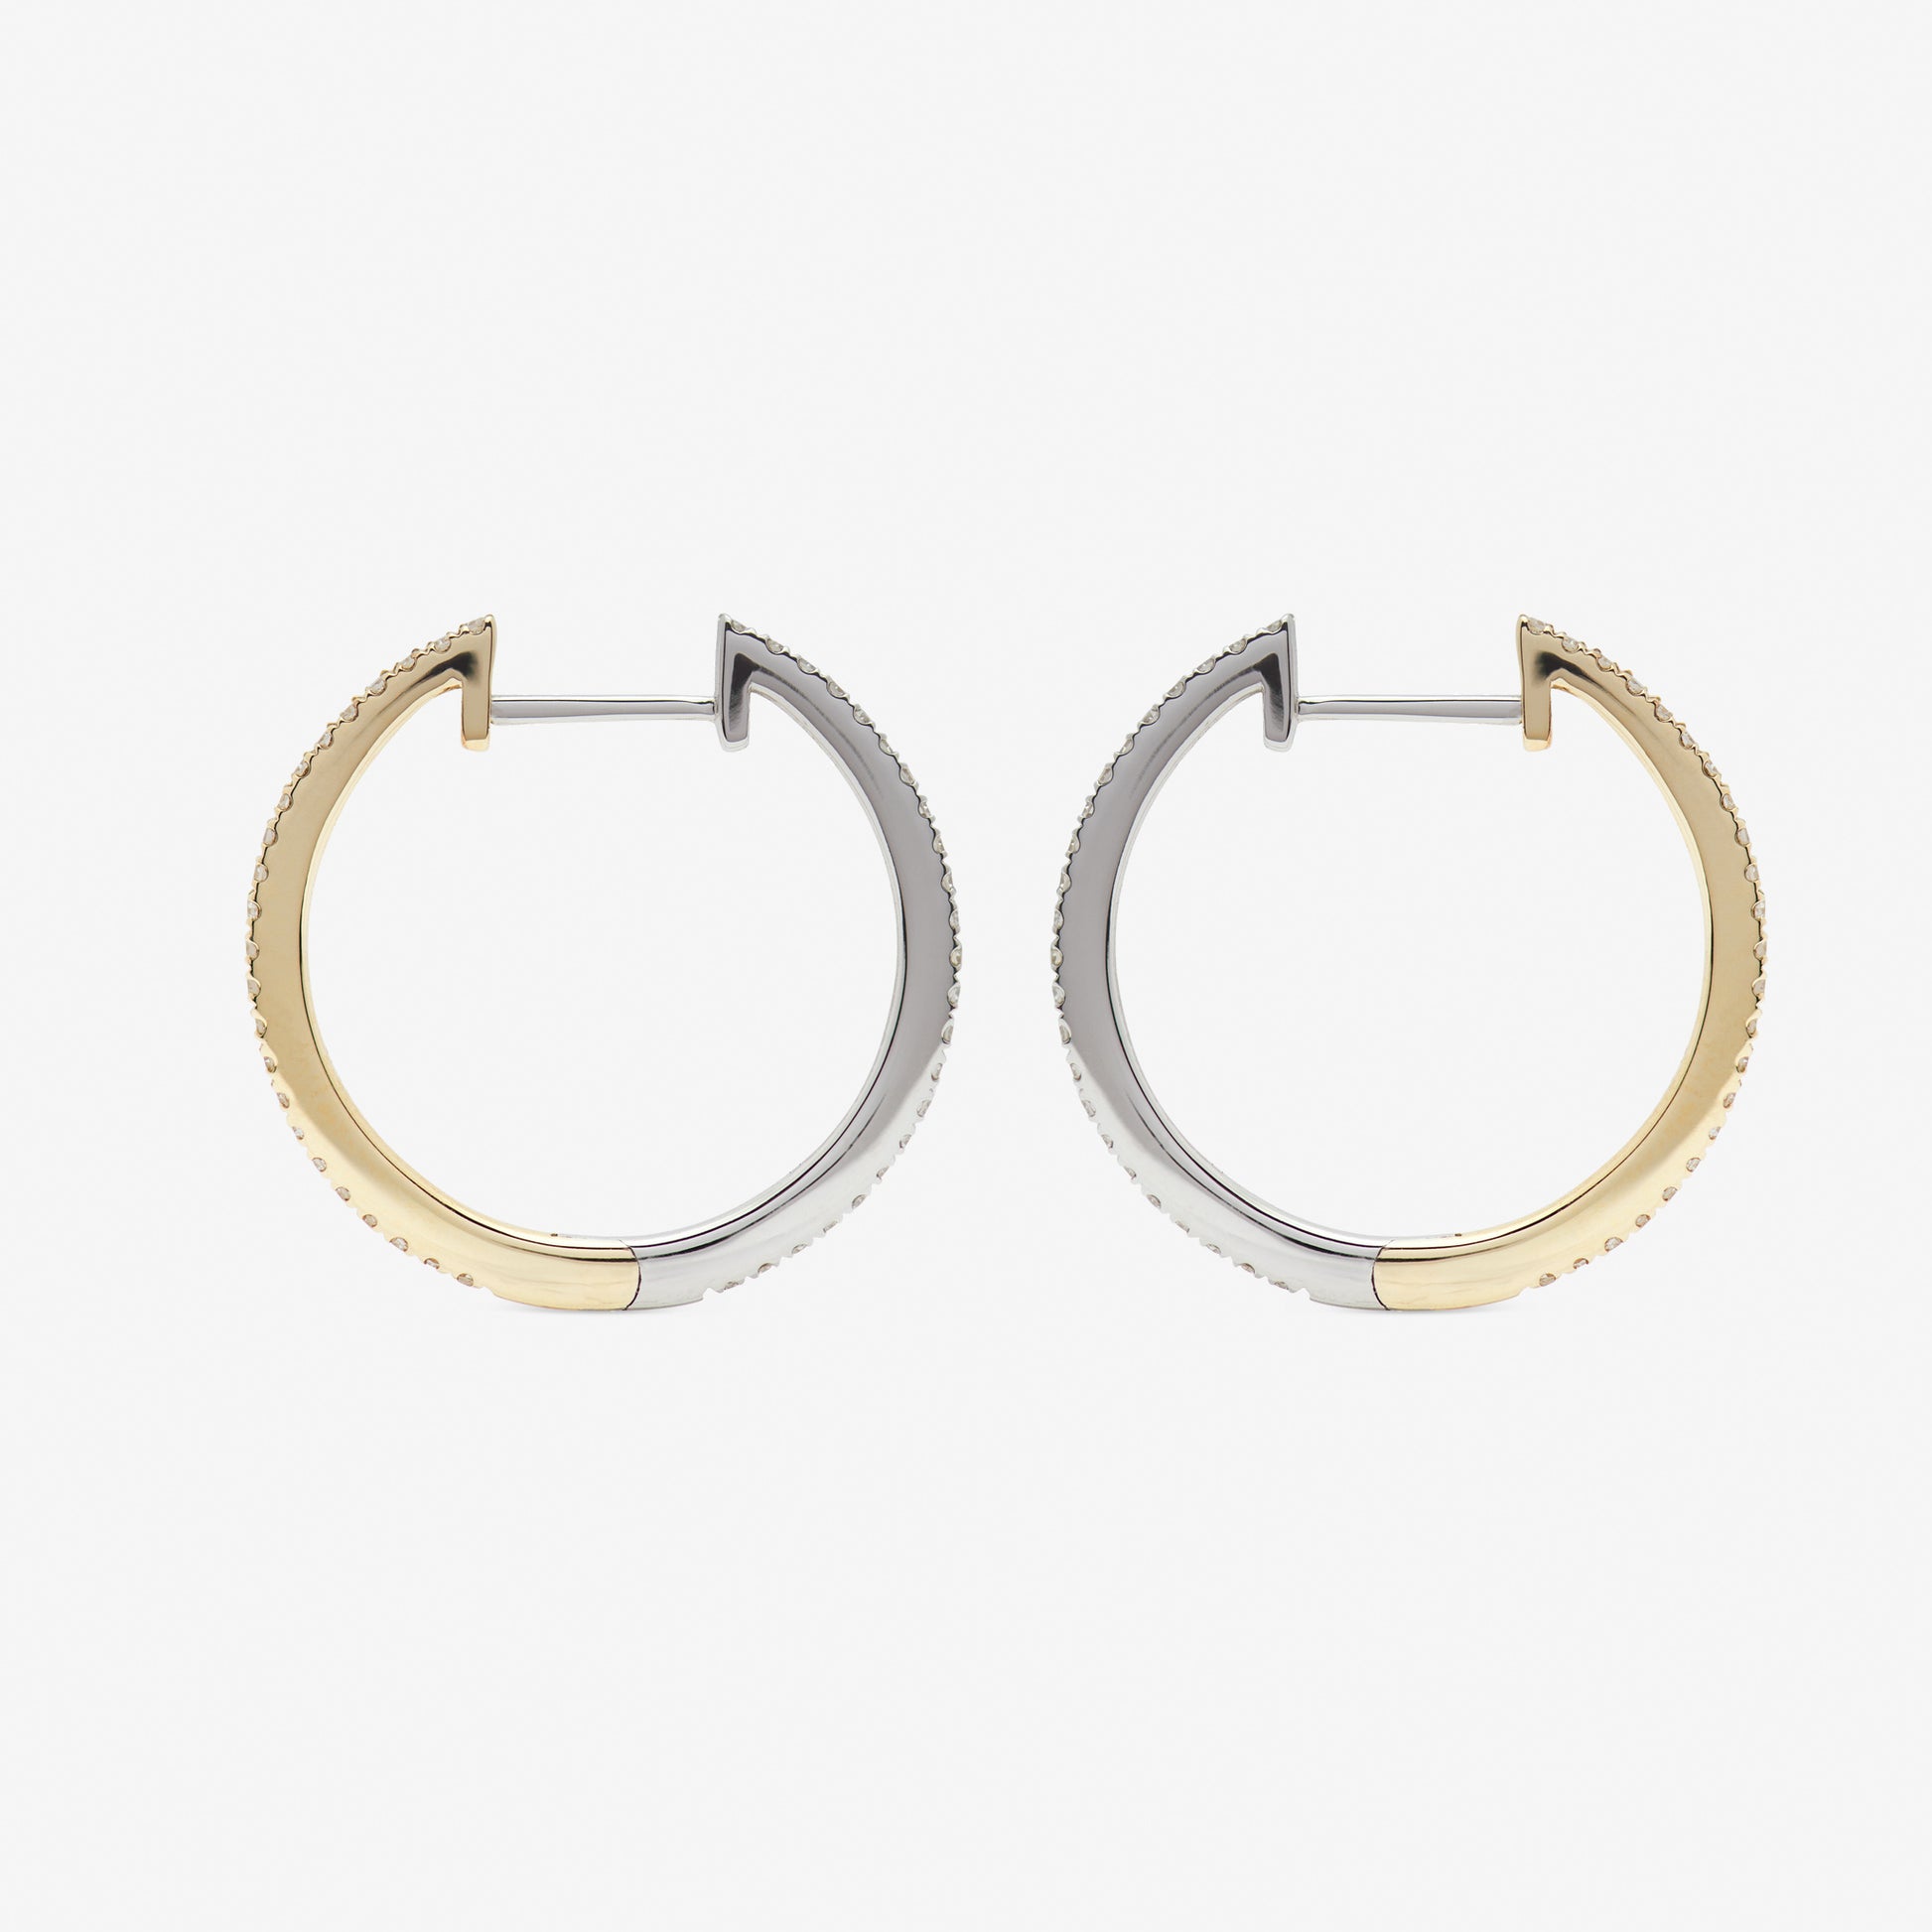 20mm hoop pair in white and yellow gold from side